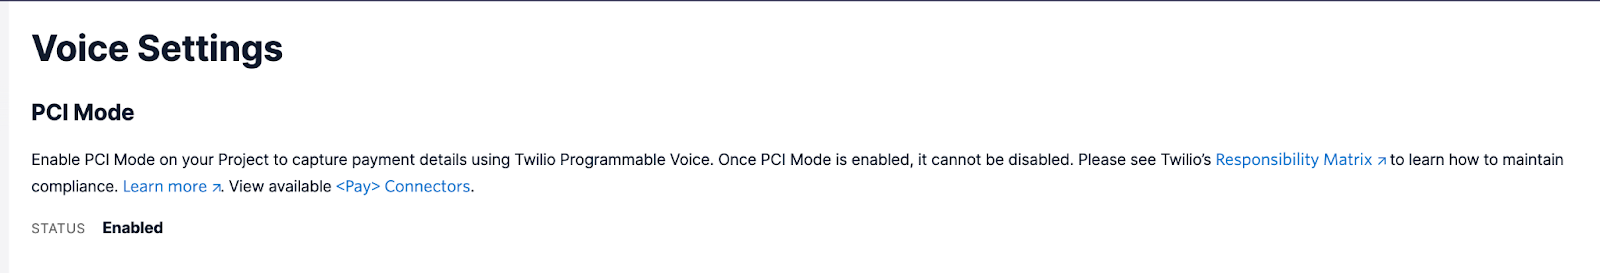 screenshot showing PCI mode enabled on voice settings